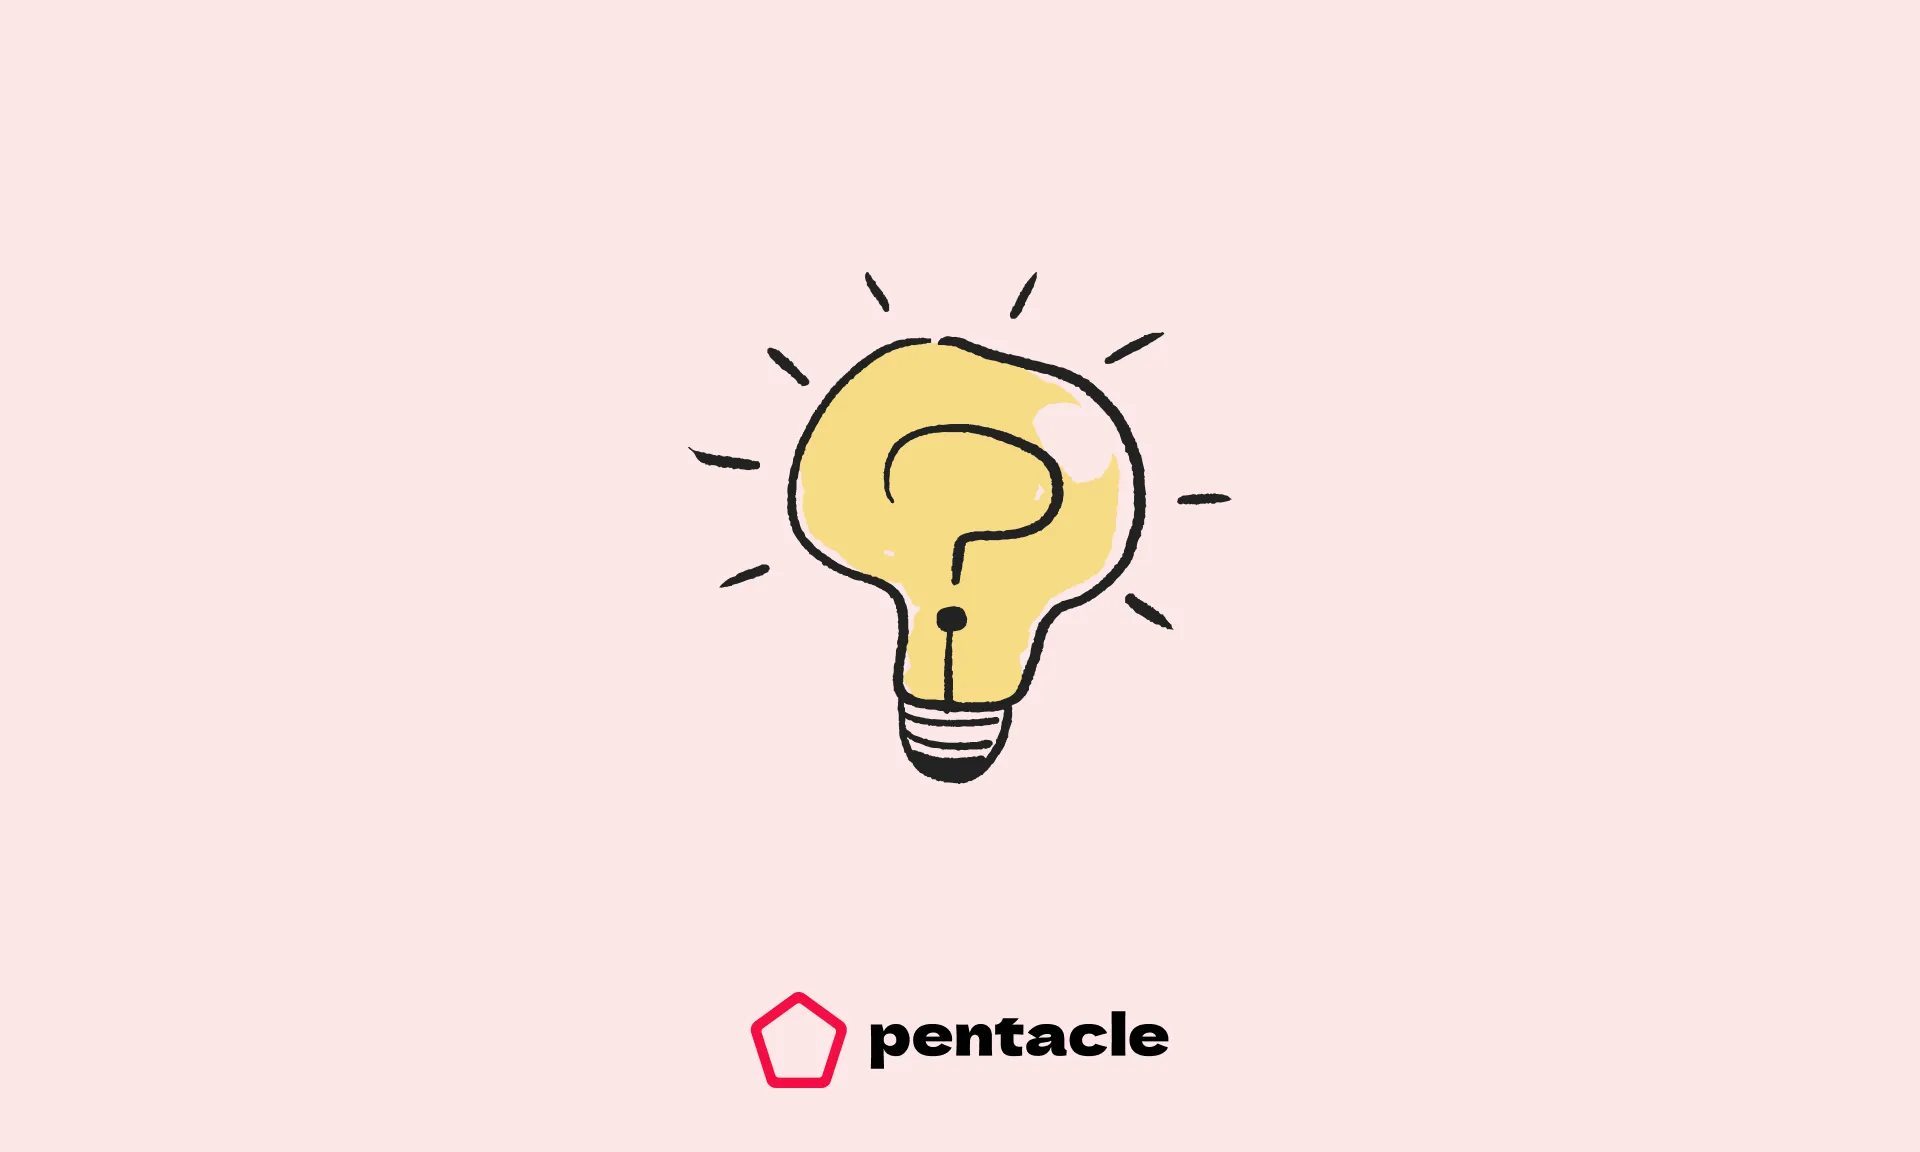 The question of Pentacle. What will it be? The tool (or, really platform) will sure solve design problems!